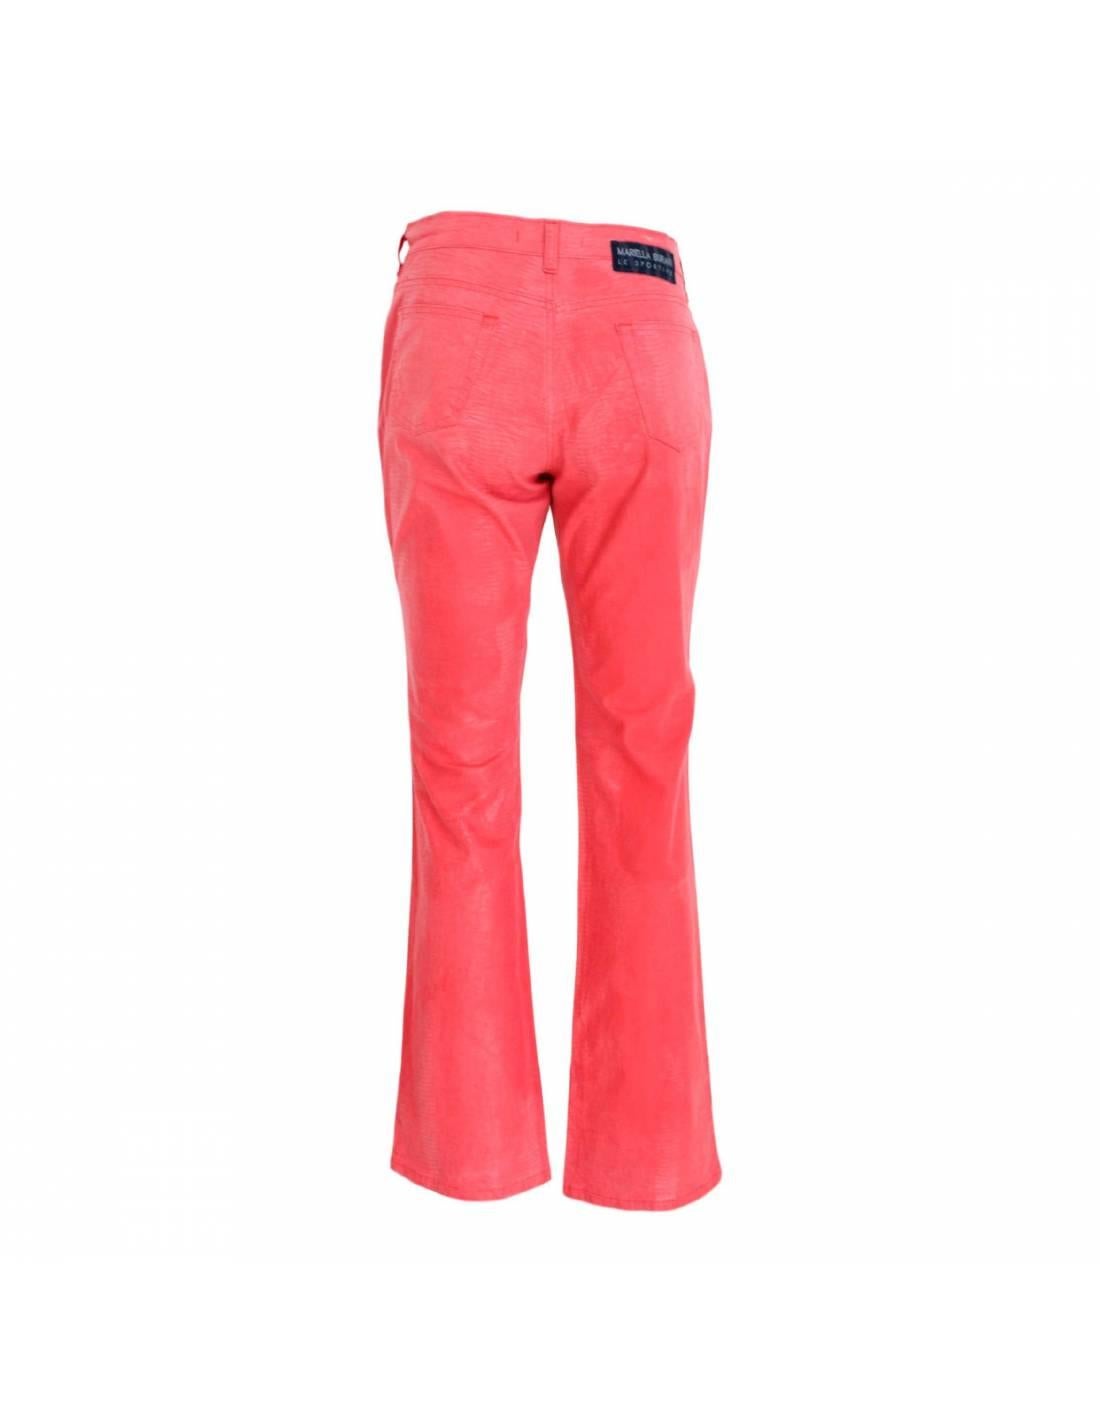 Mariella Burani Pink Cotton Waxed Flared Pants In Excellent Condition For Sale In Brindisi, Bt